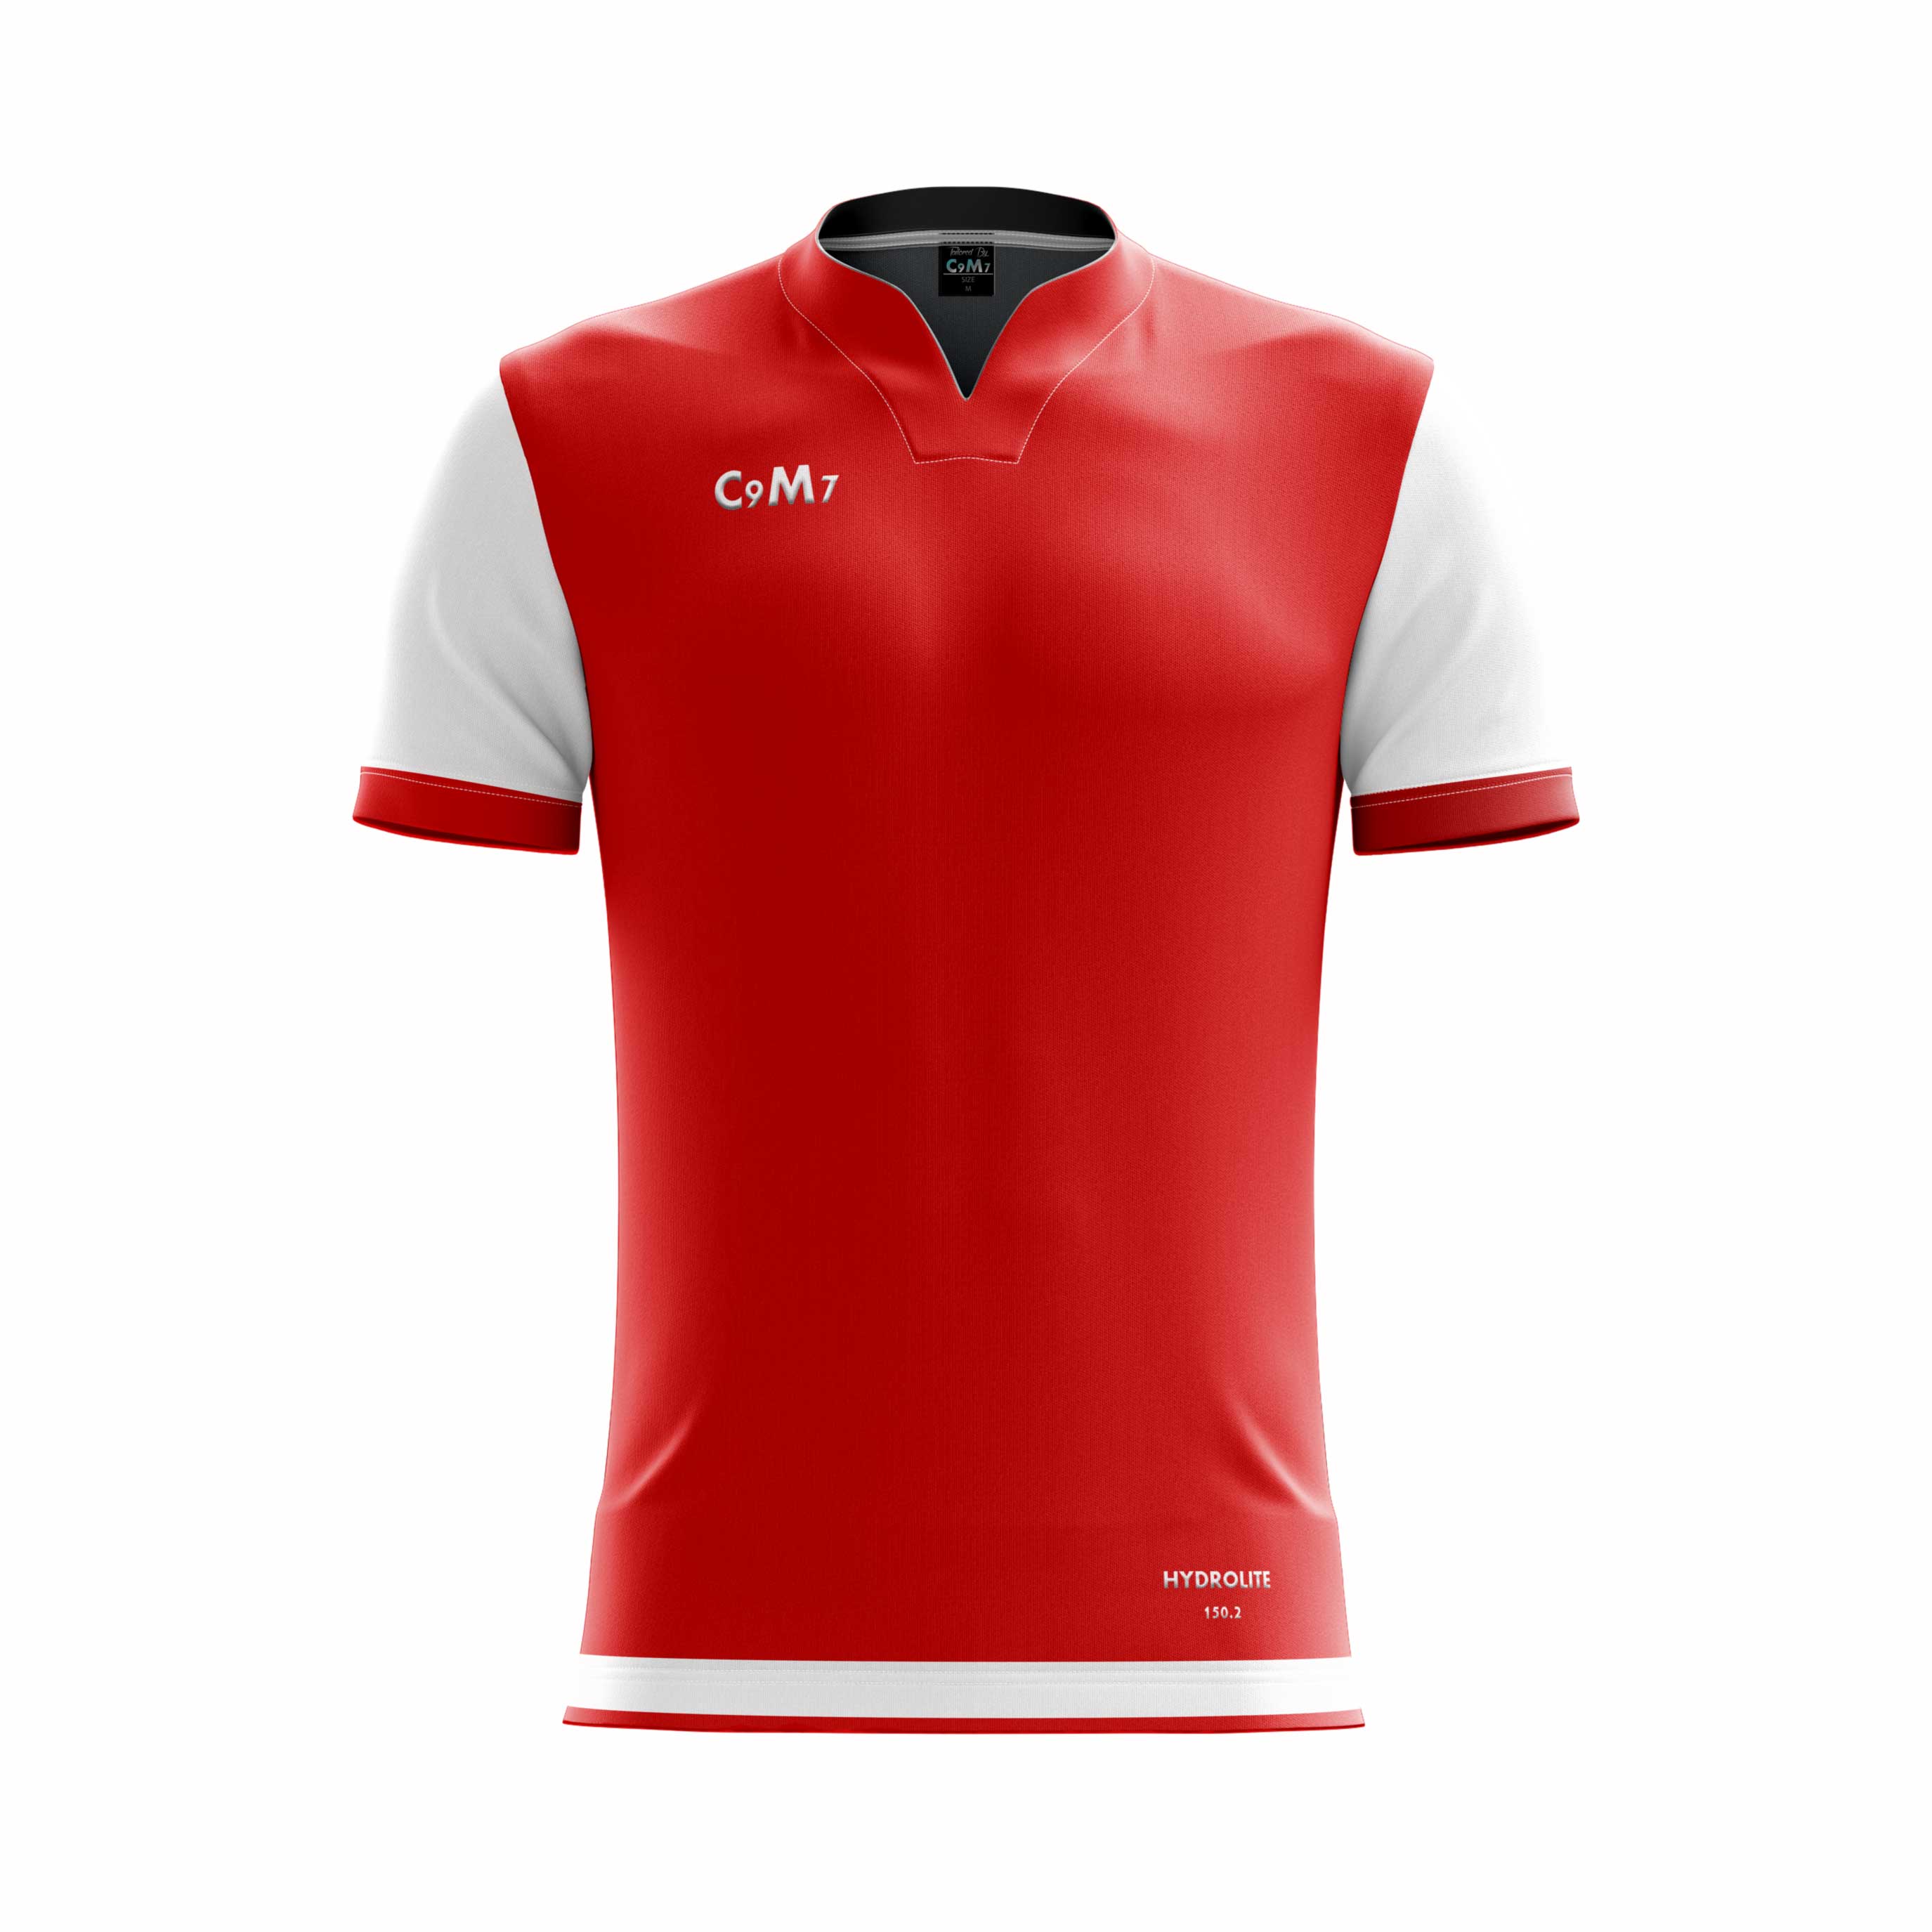 red and white football jersey